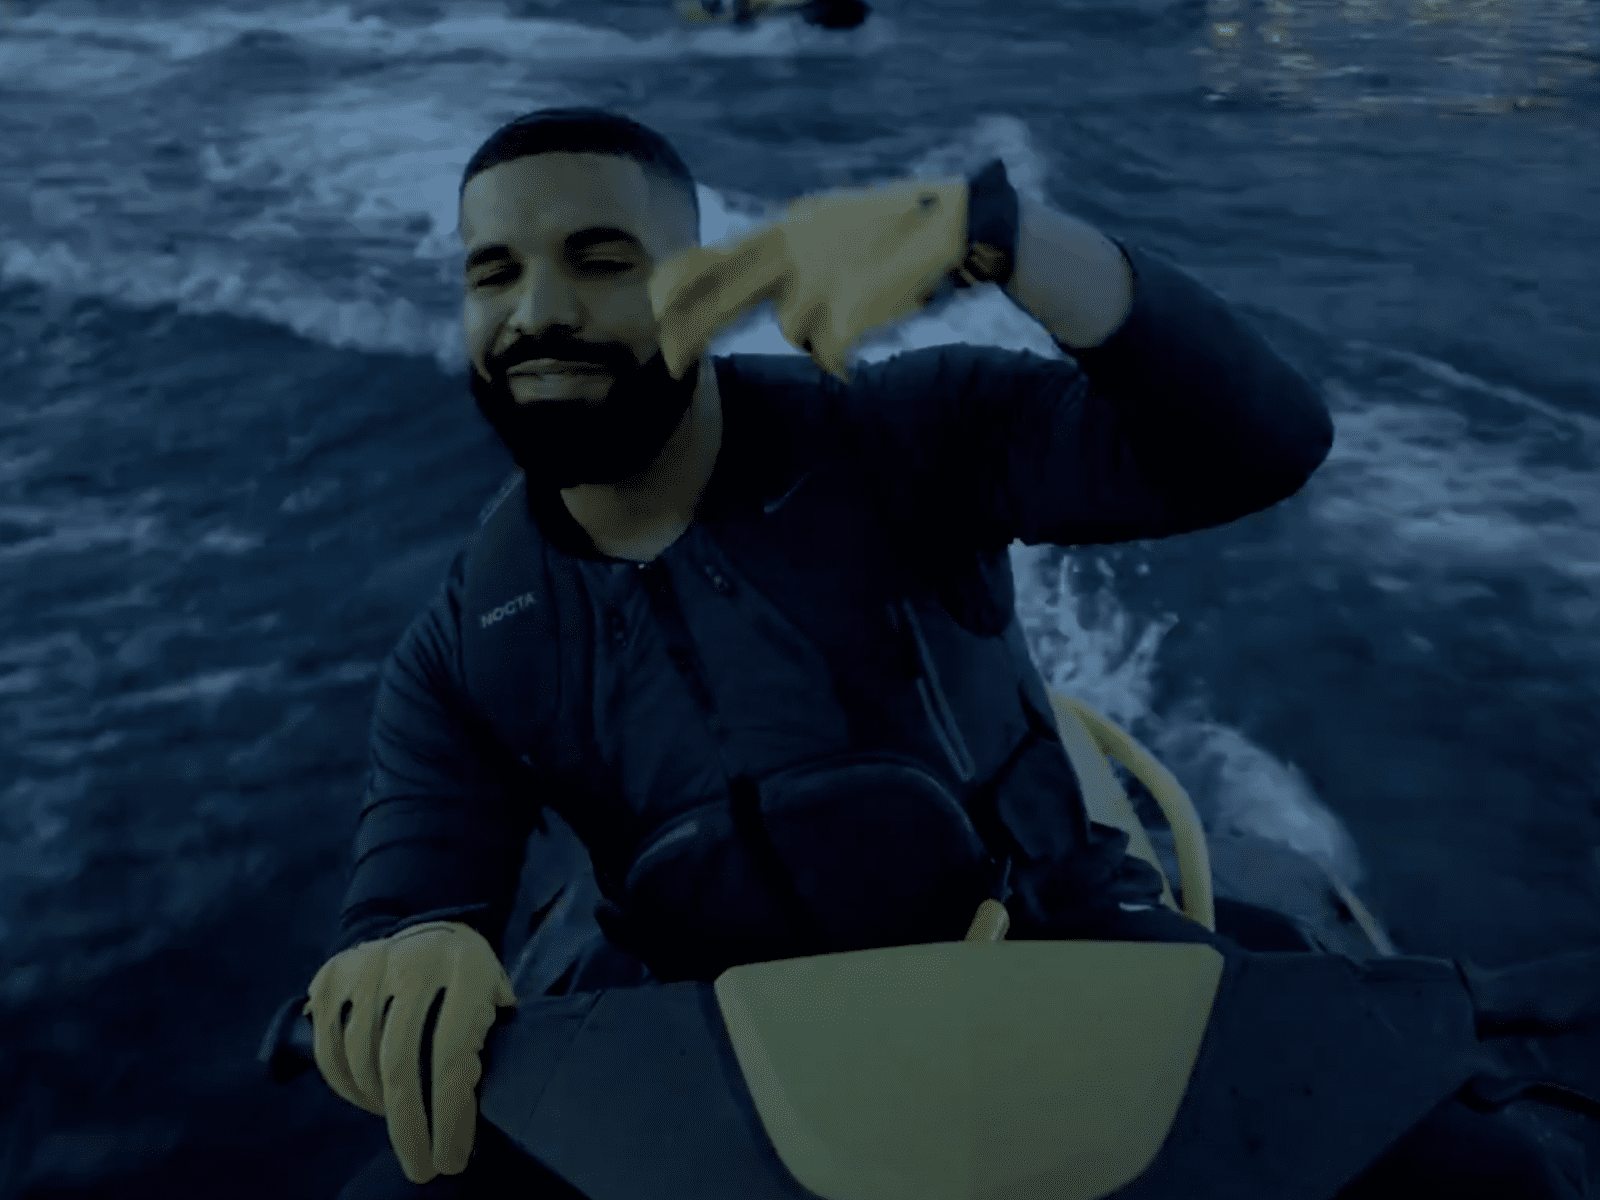 Drake's Laugh Now, Cry Later is Peaking On International Music Charts